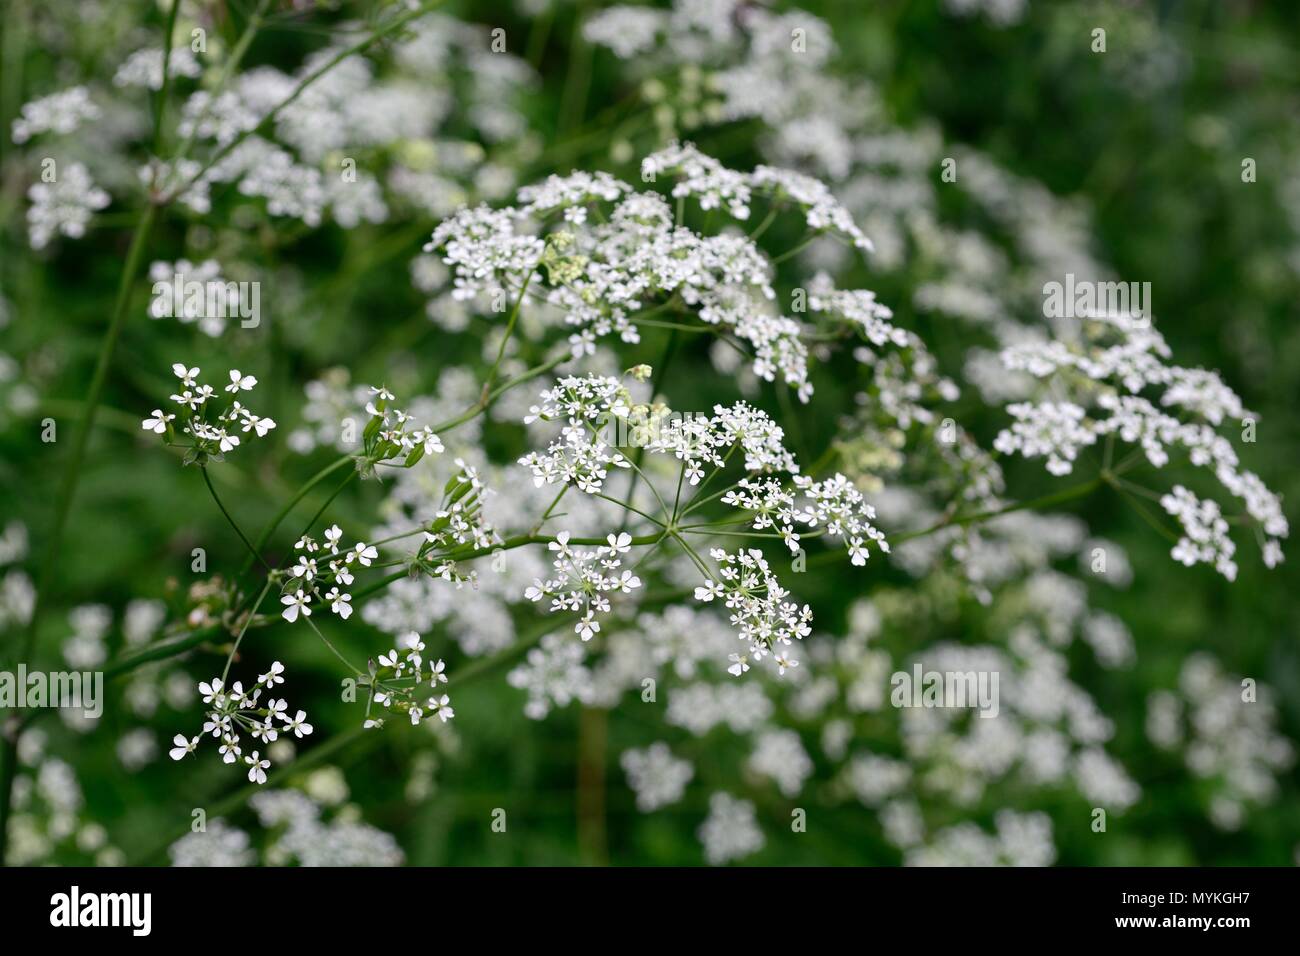 Cow parsley Anthrisus sylvestris delicate white flowers with fern like foliage in spring Stock Photo